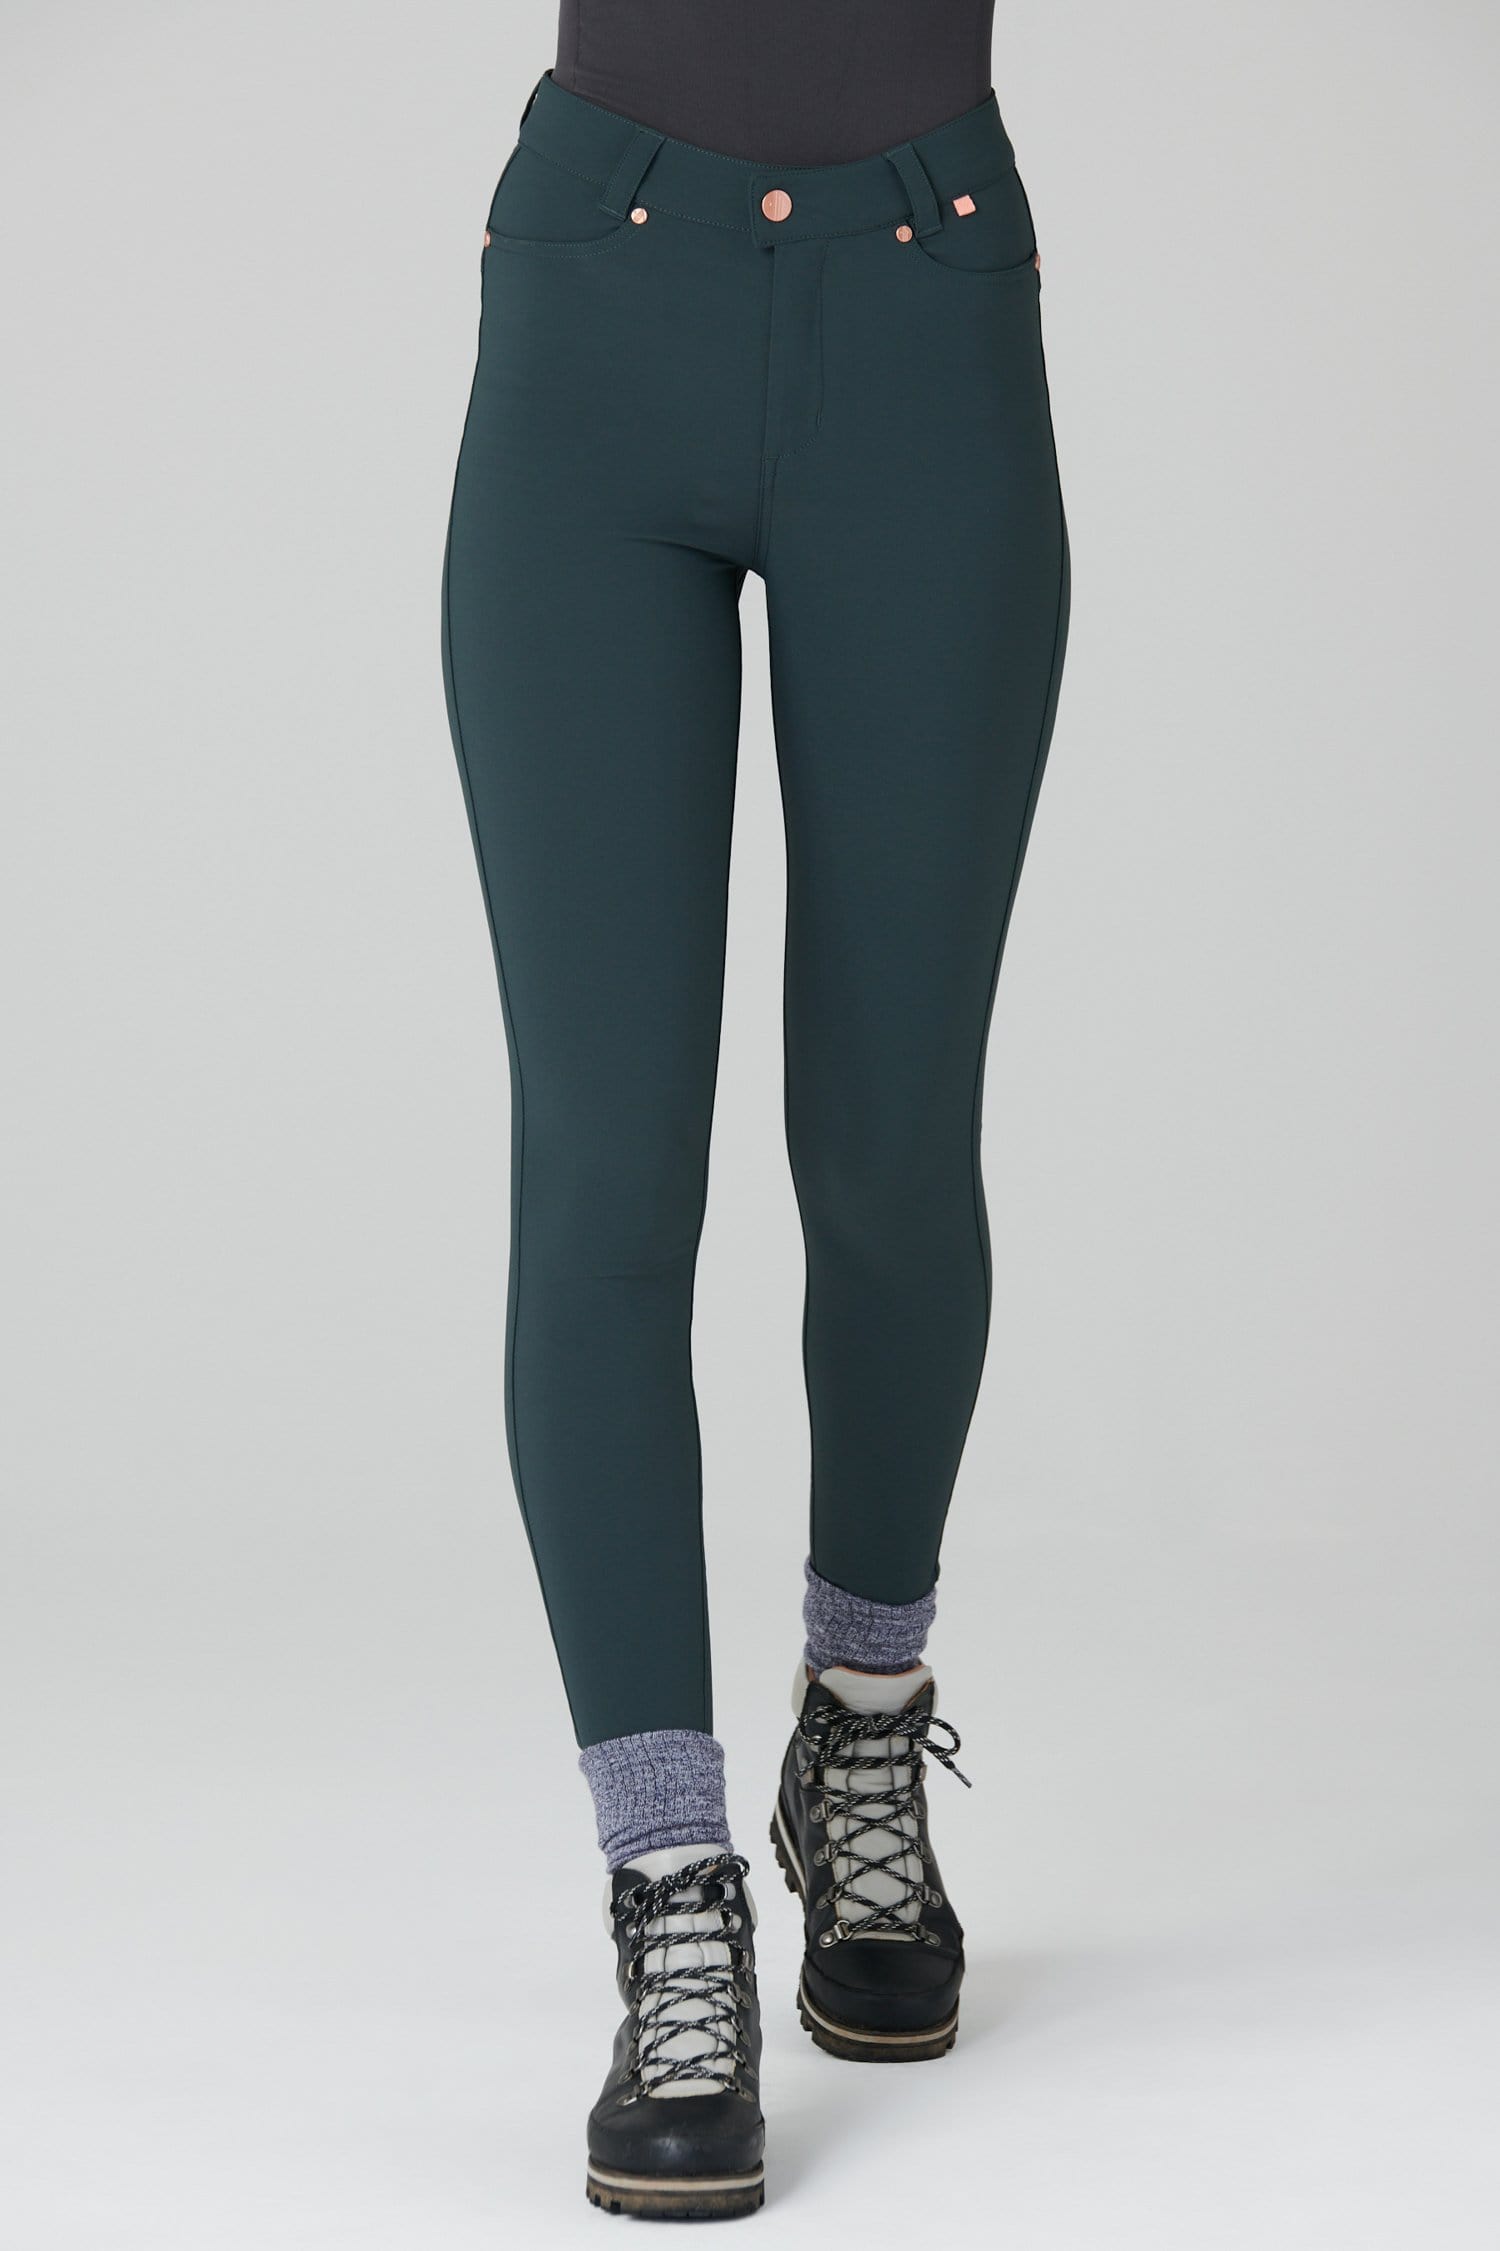 Max Stretch Skinny Outdoor Trousers - Forest Green - 30r / Uk12 - Womens - Acai Outdoorwear